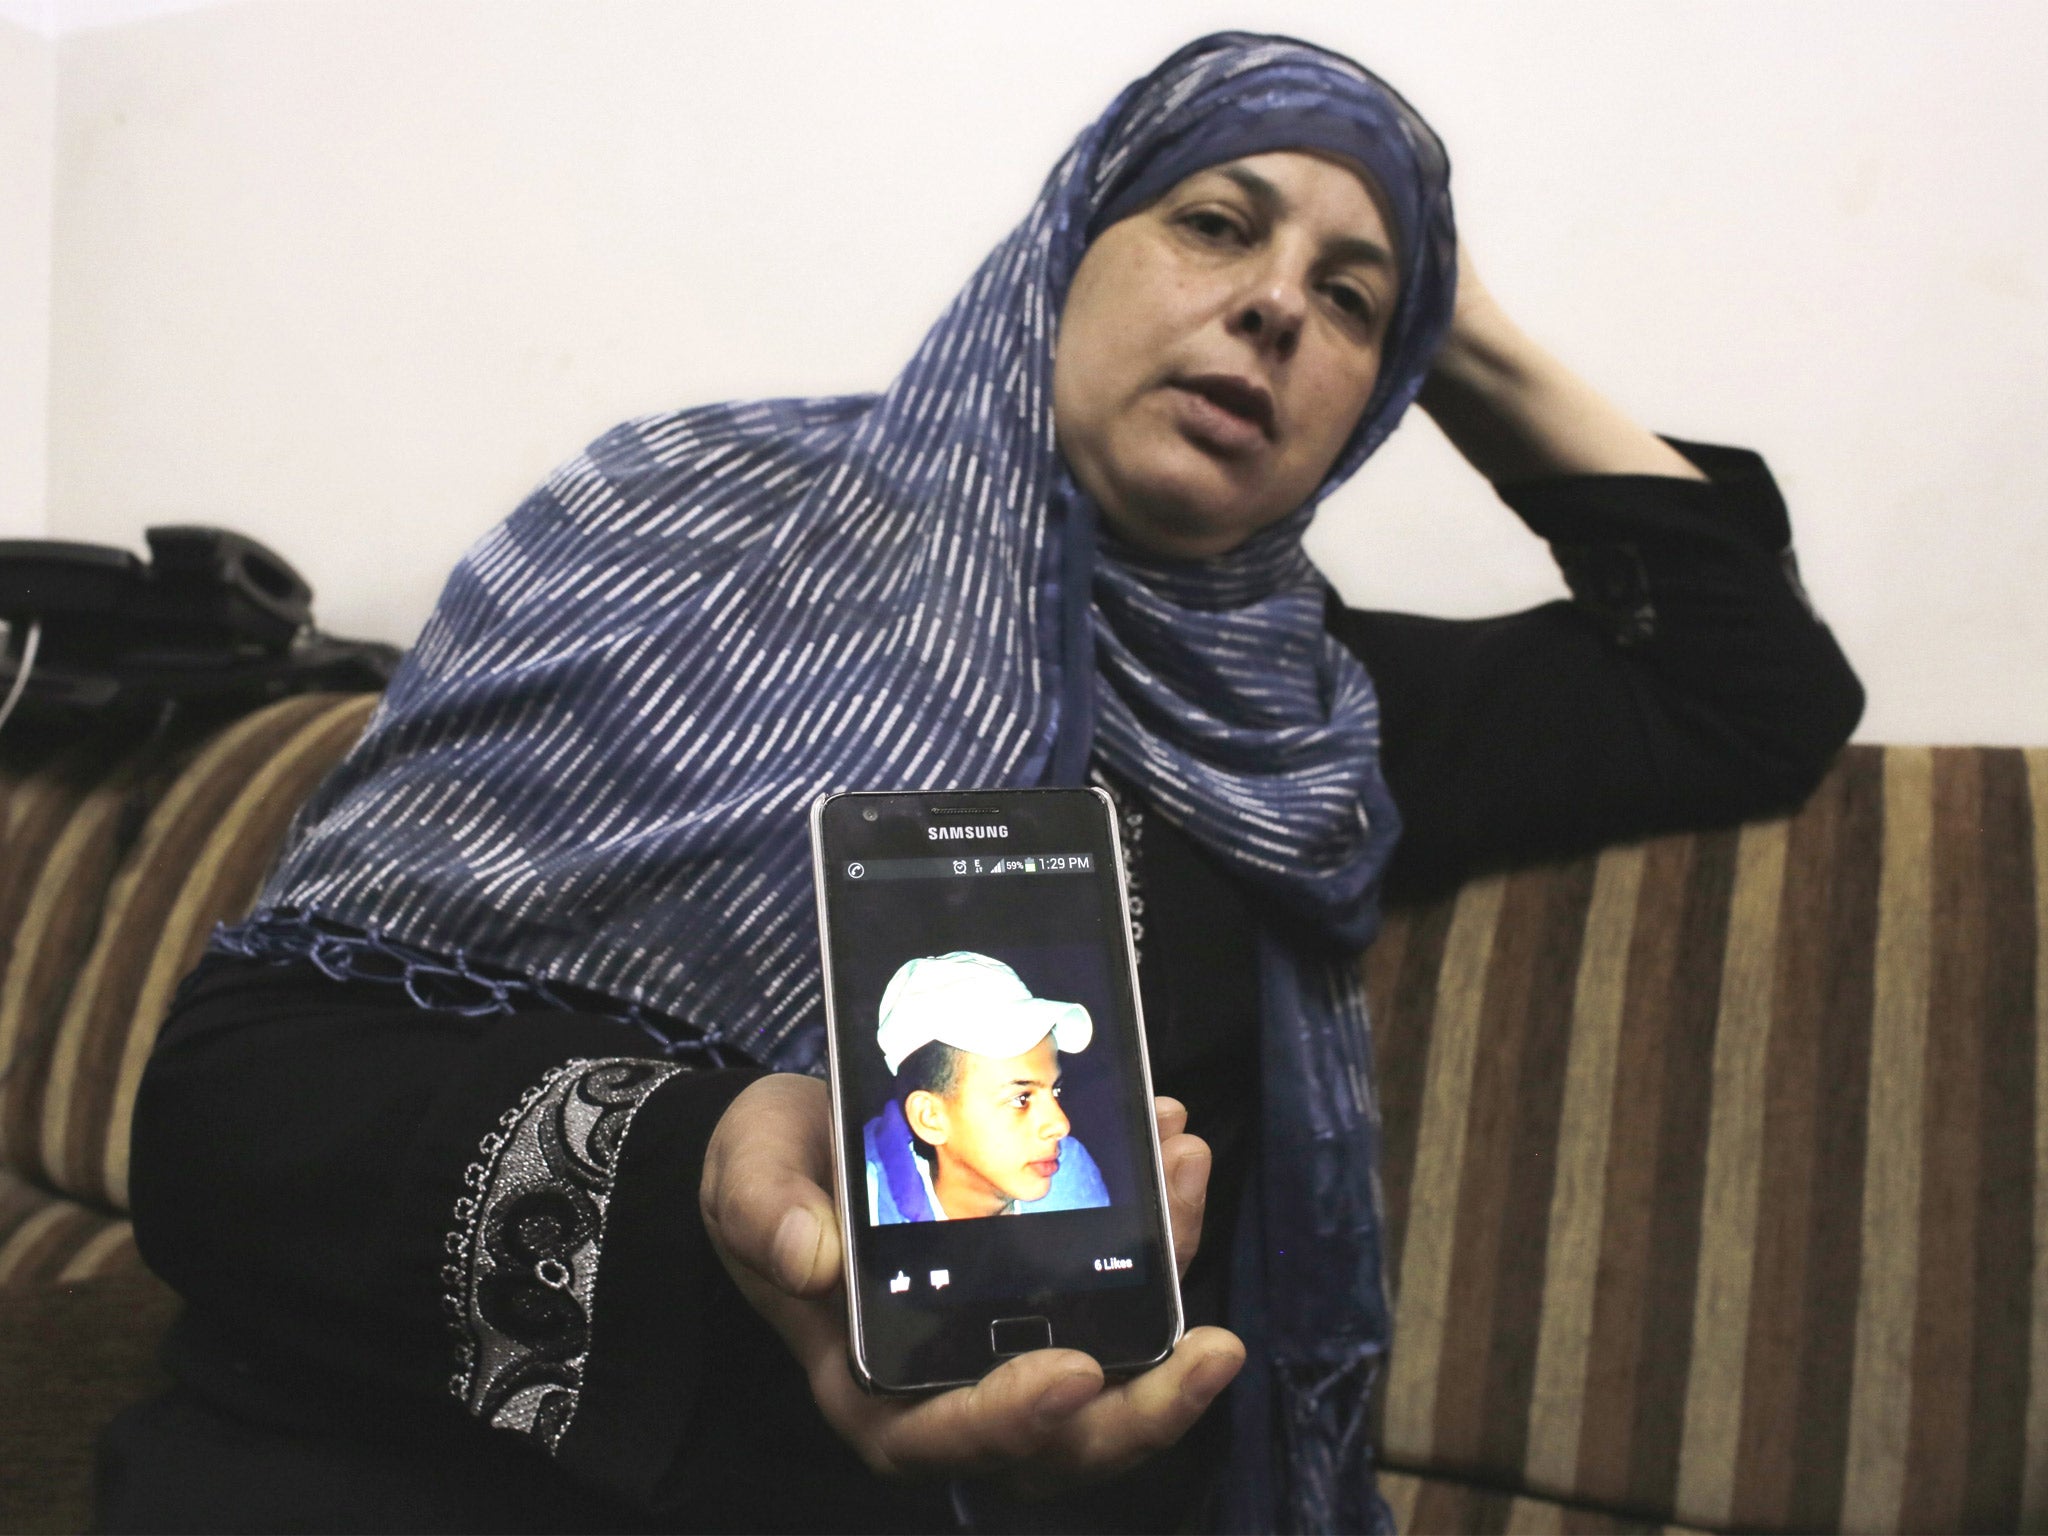 The mother of Mohammed Abu Khdeir shows a picture of her son